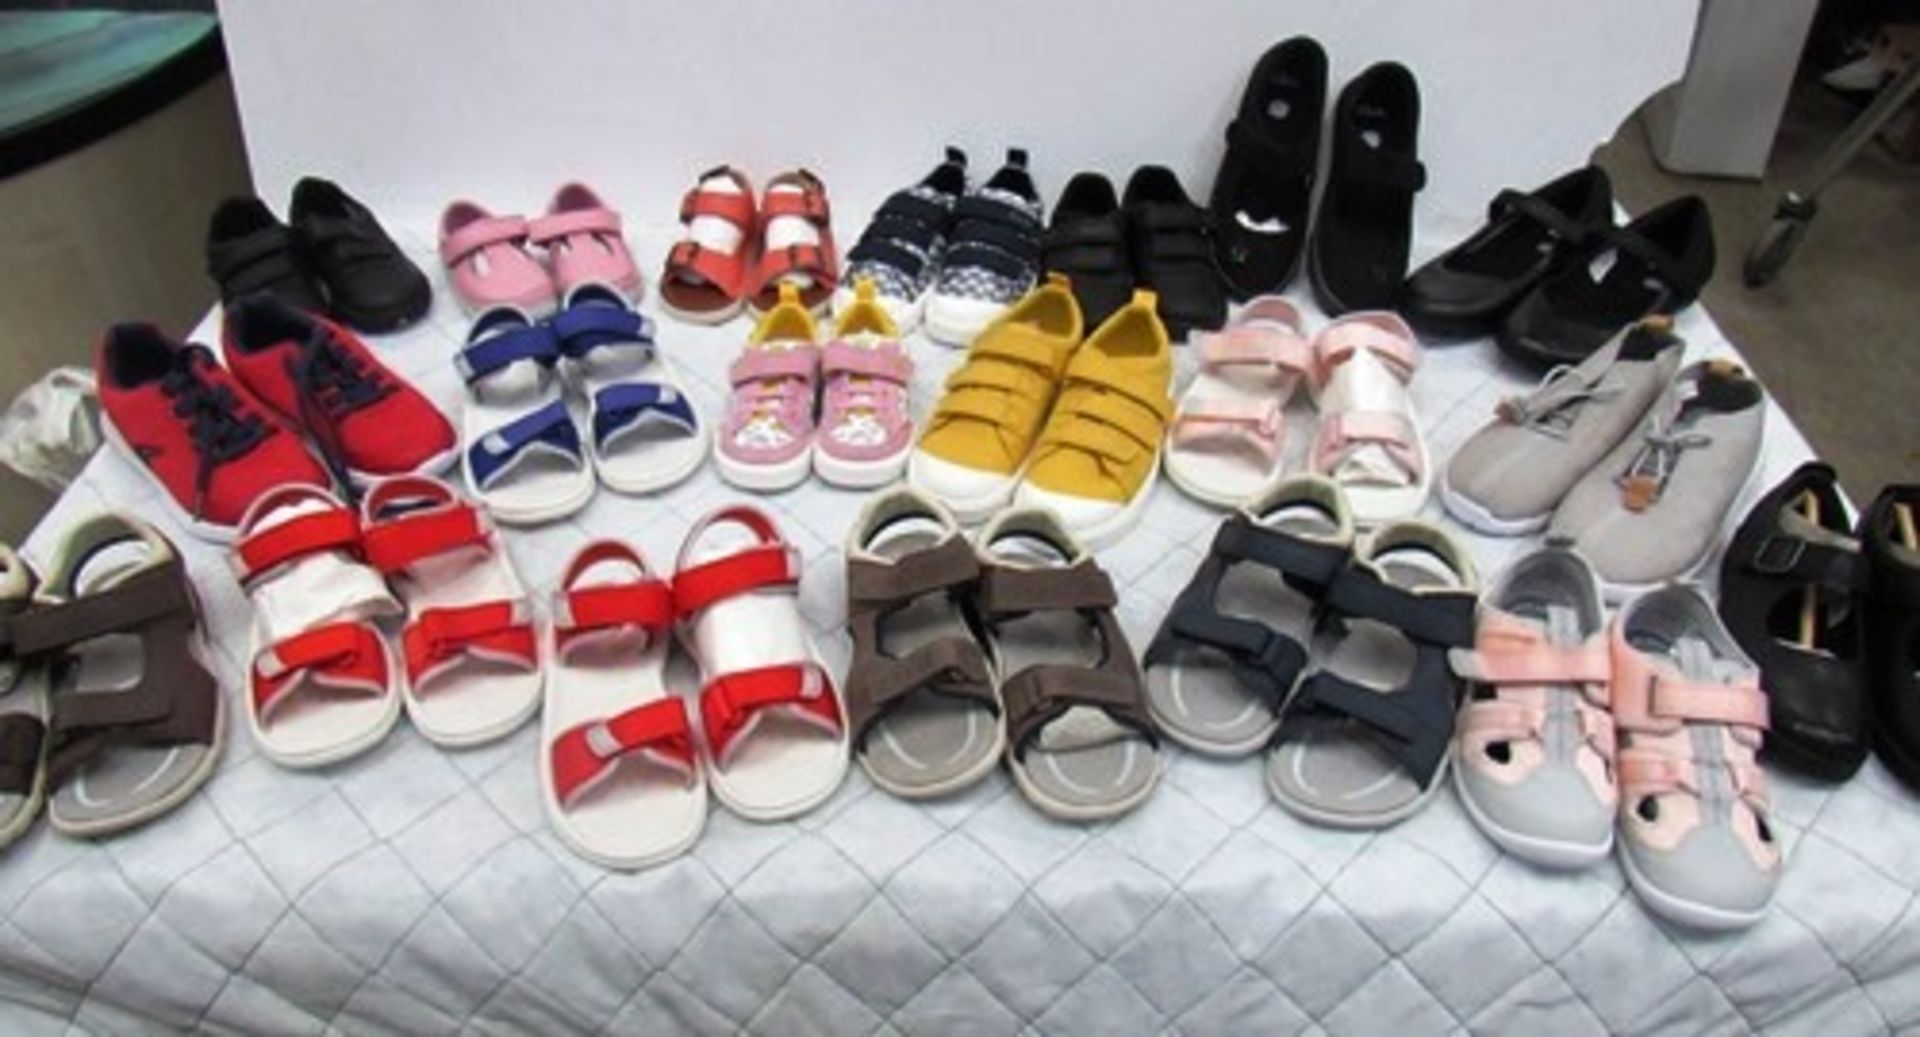 20 x pairs of children's Clark shoes and sandals in assorted styles and sizes - New (ES15) - Image 3 of 3